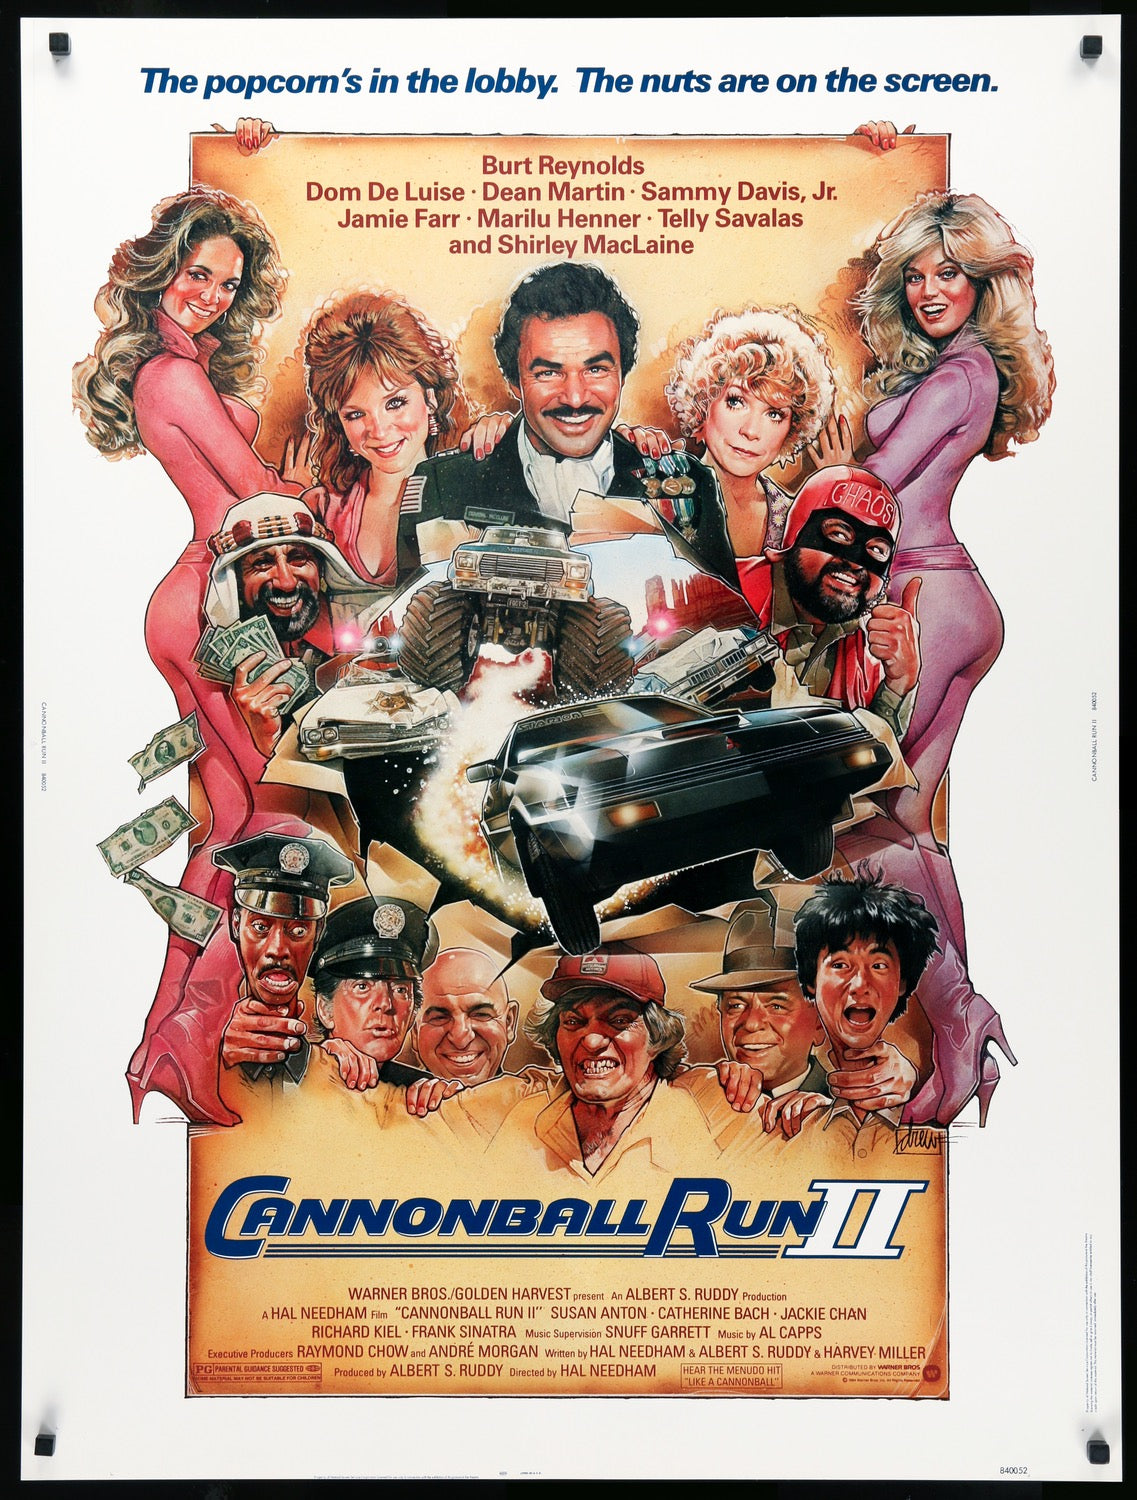 The Cannonball Run 2 (1984) Original Thirty by Forty Movie Poster